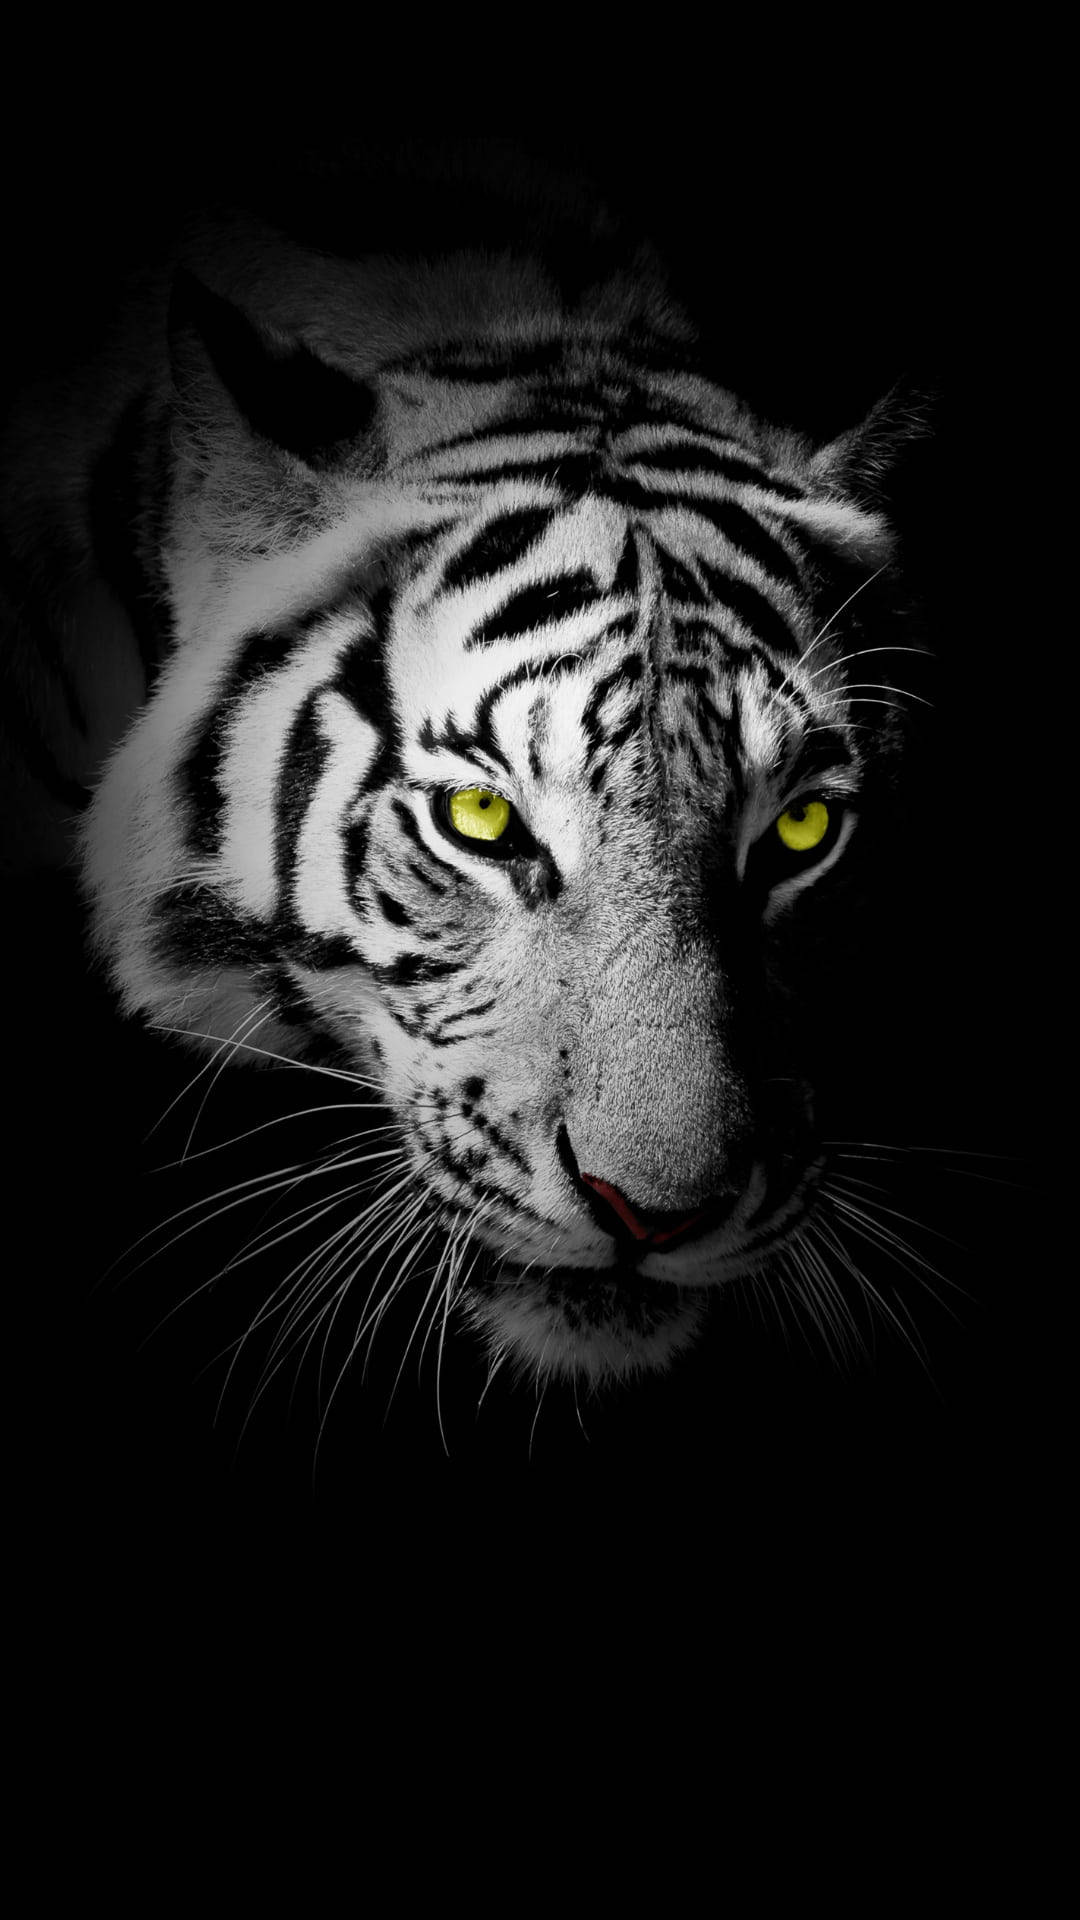 Black Tiger With Neon Yellow Eyes Wallpaper